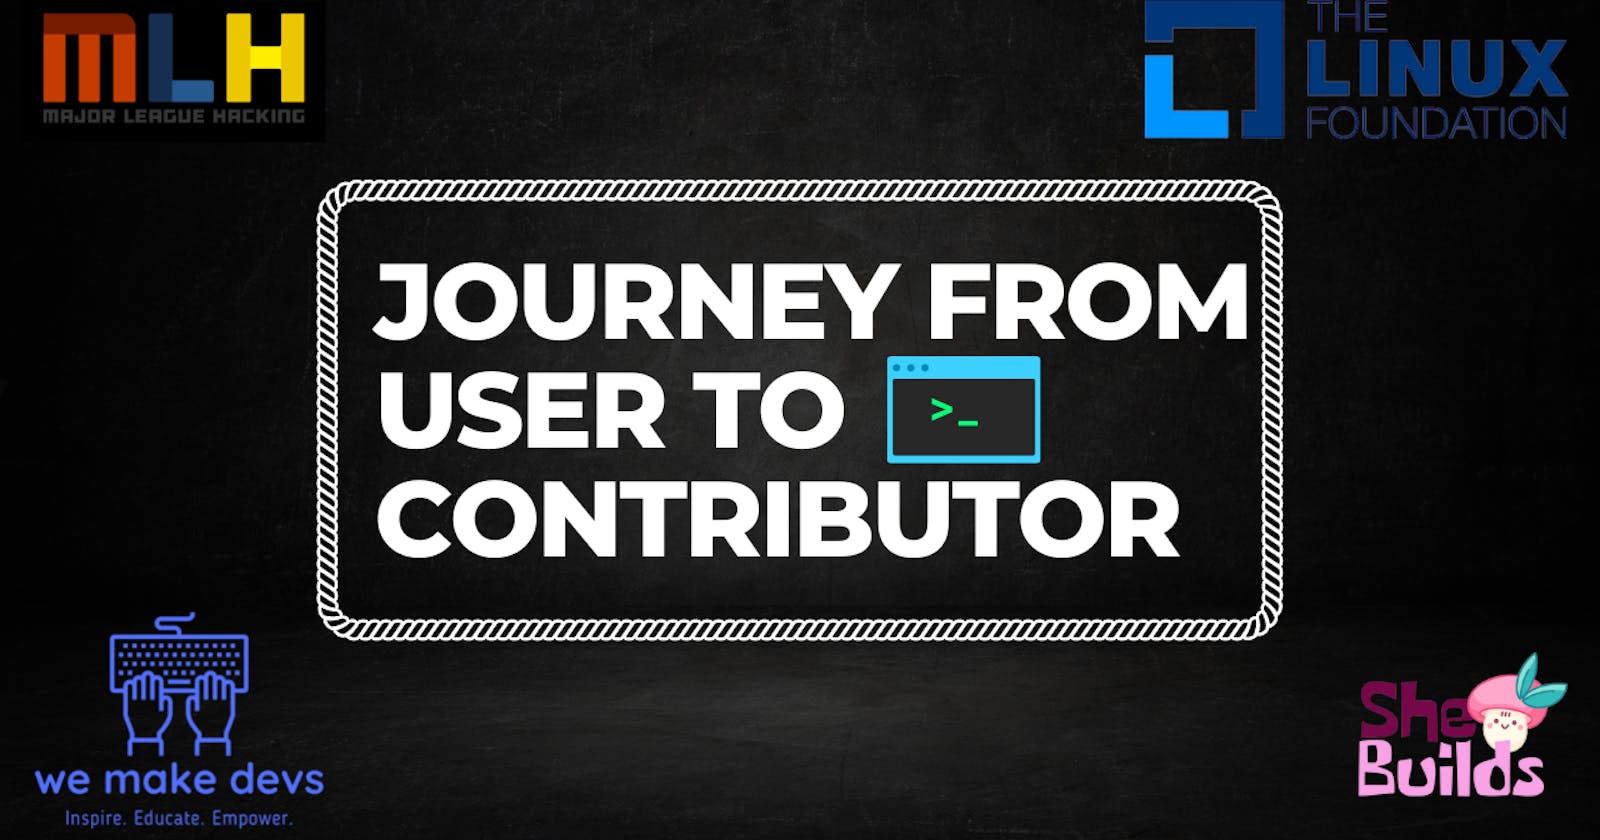 From User to Contributor: My Journey into the Open Source Community